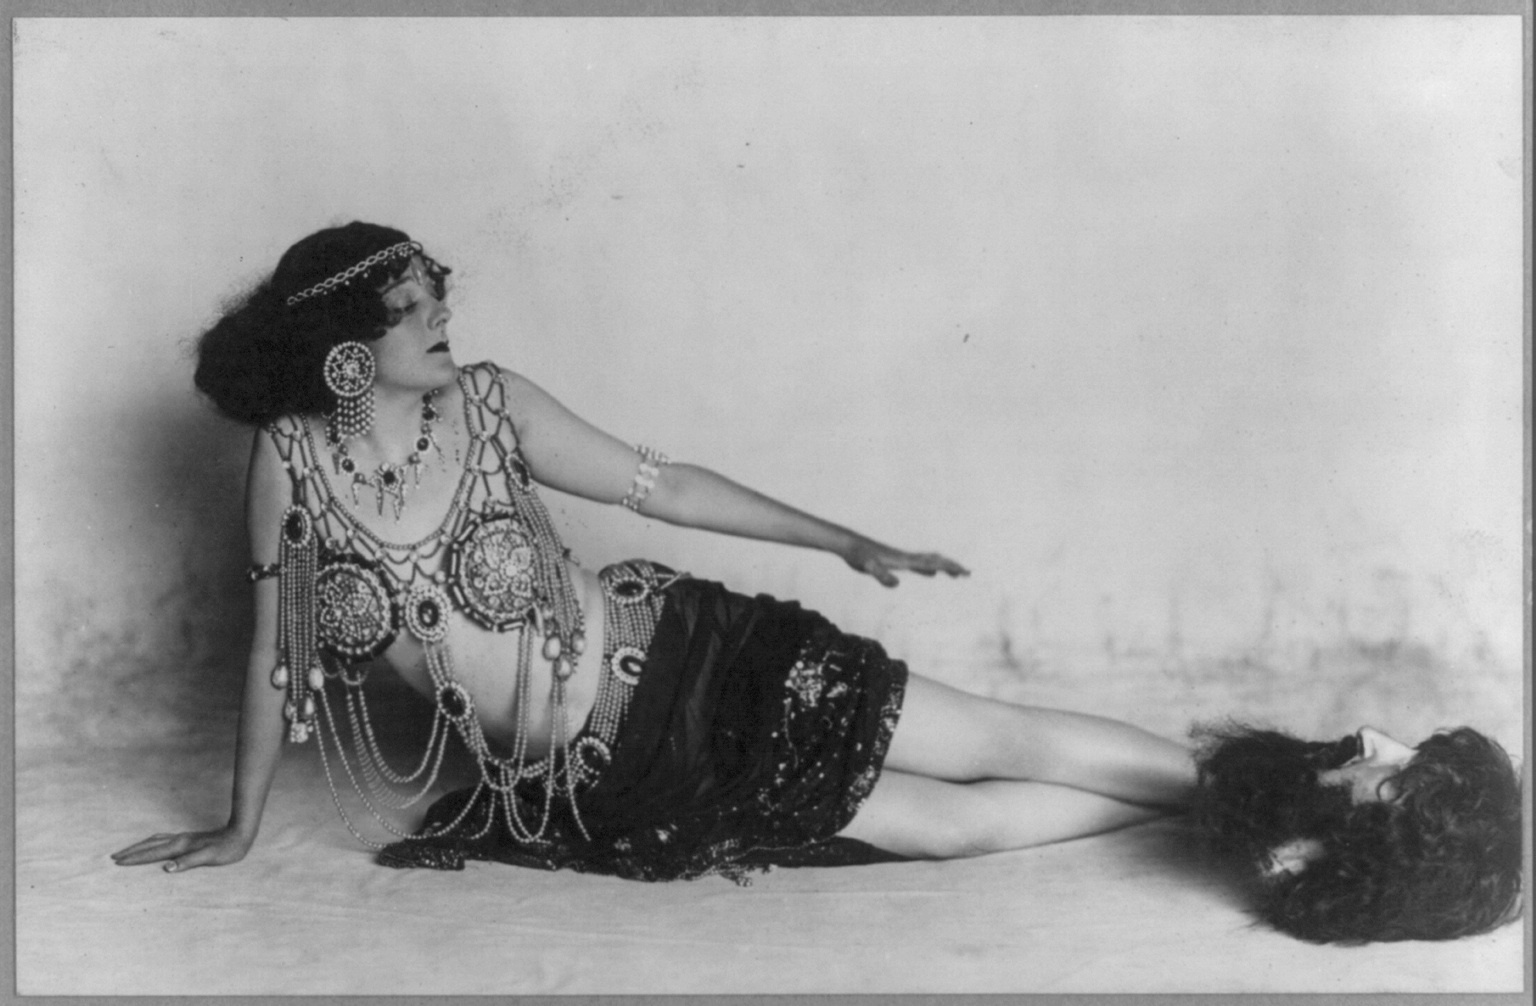 Frank-C.-Bangs-Gertrude-Hoffmann-as-Salome-1908ca.-Image-courtesy-Library-of-Congress-Prints-and-Photographs-Division-Washington-D.C